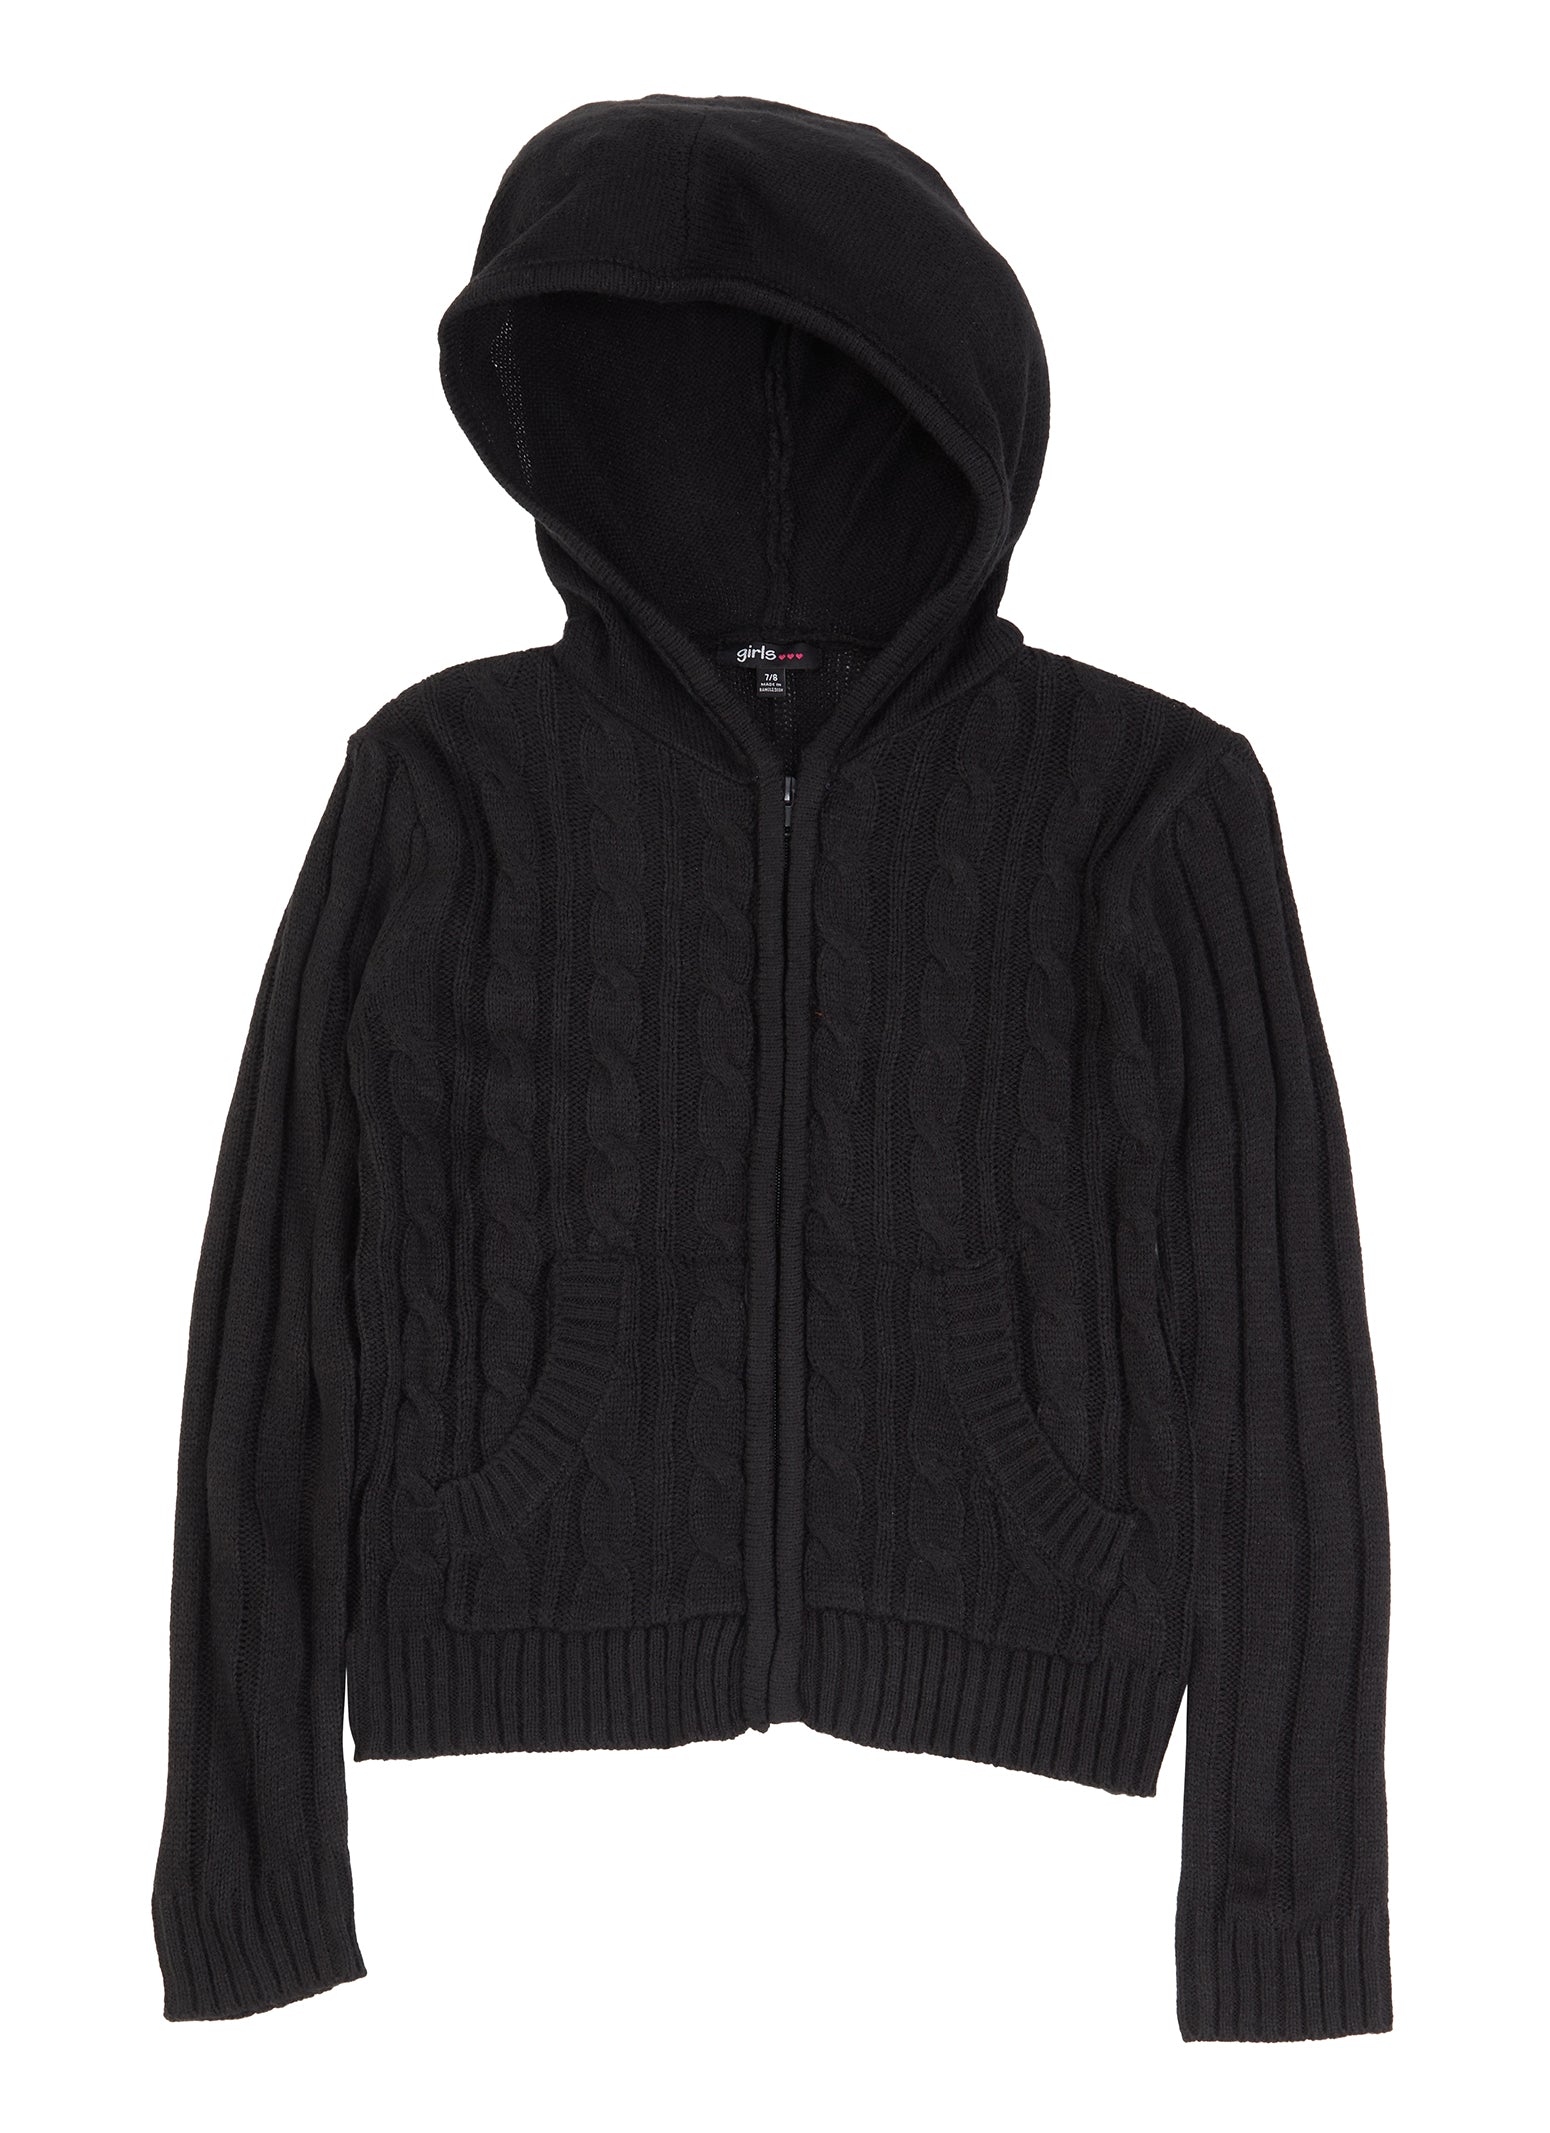 Girls Cable Knit Hooded Zip Front Sweater - Black